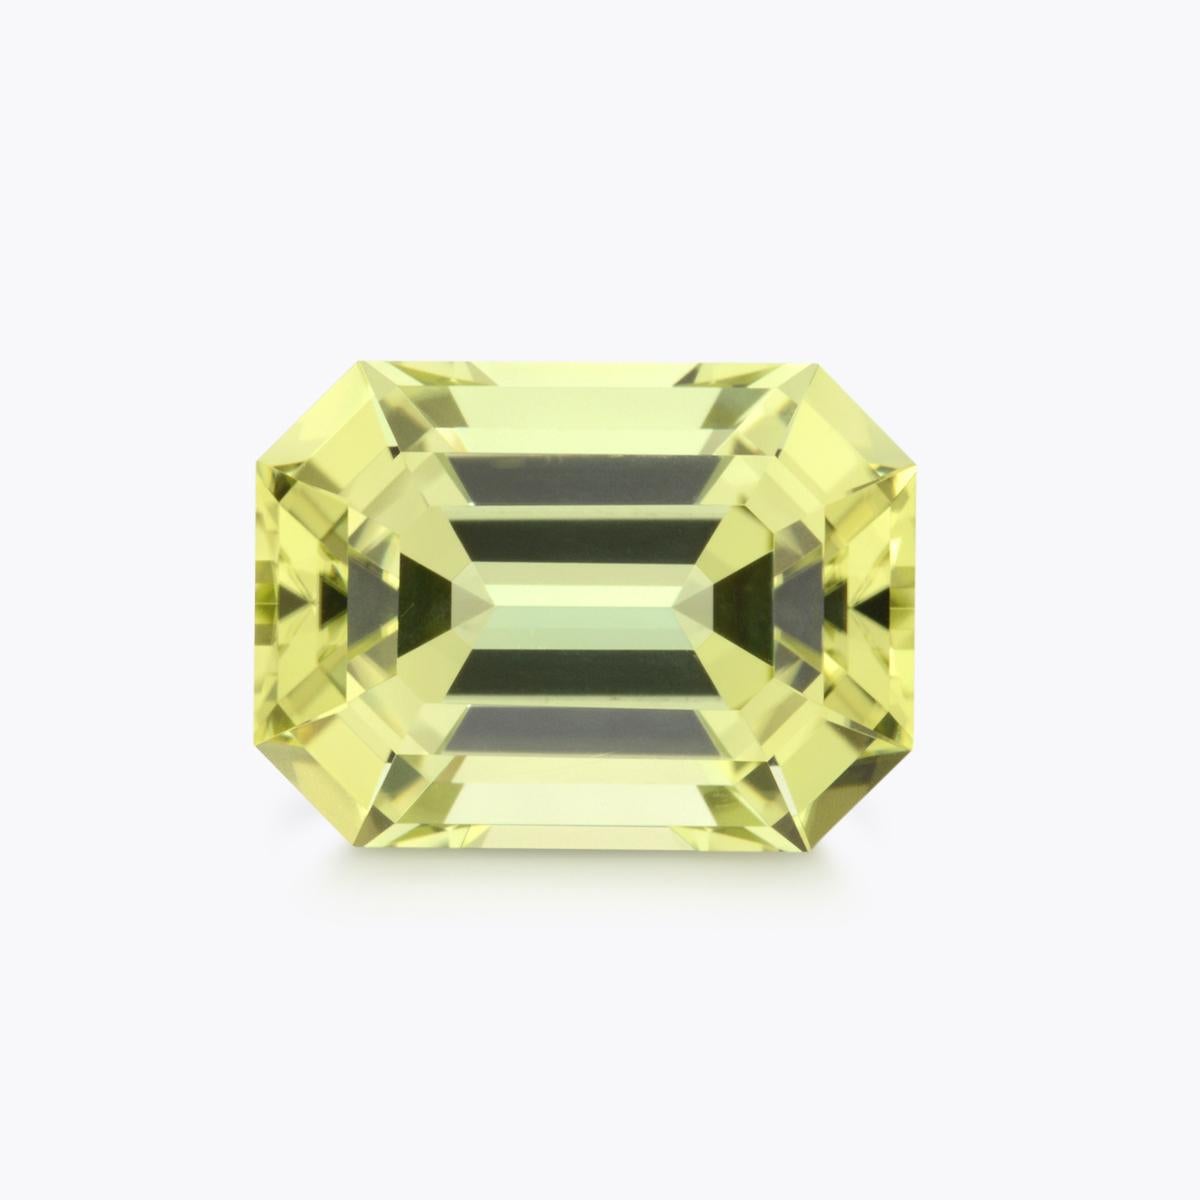 Lovely 7.86 carat Apple Green Tourmaline emerald-cut loose gemstone, offered unmounted.
Dimensions: 13.4 x 9.8 x 7.9 mm.
Returns are accepted and paid by us within 7 days of delivery.
We offer supreme custom jewelry work upon request. Please contact